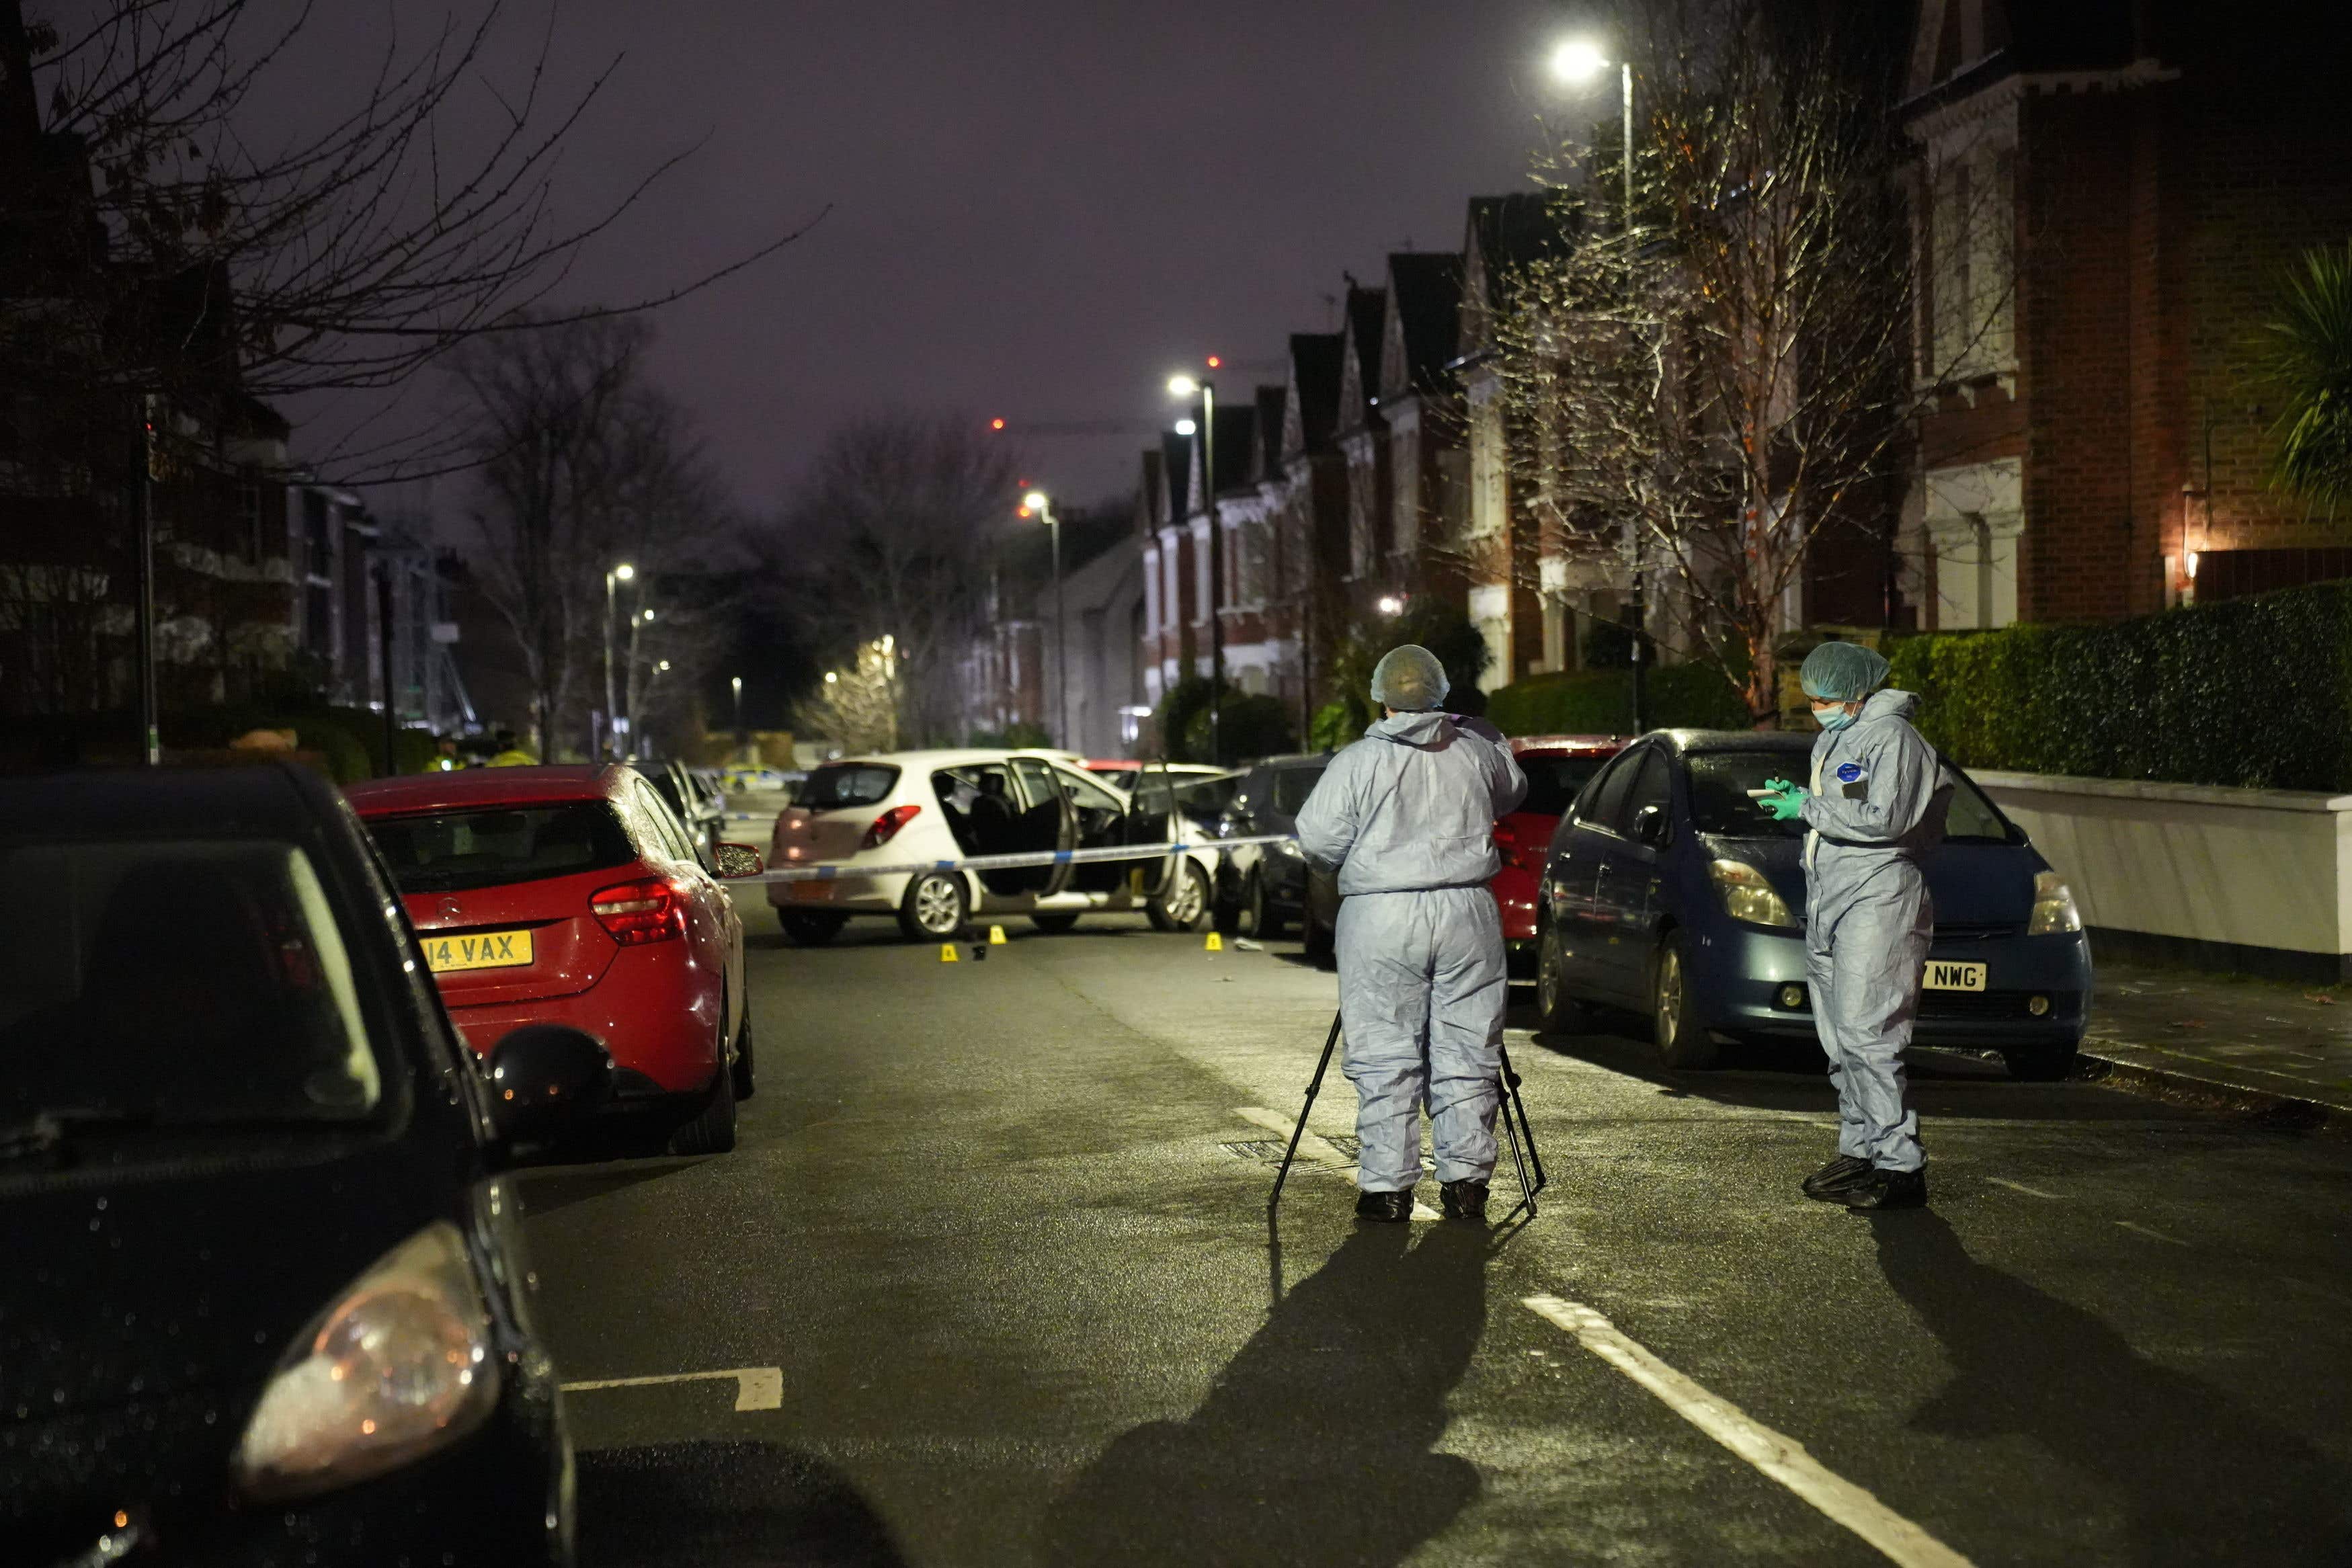 The attack on a mother and her two young children occurred near Clapham Common on 31 January